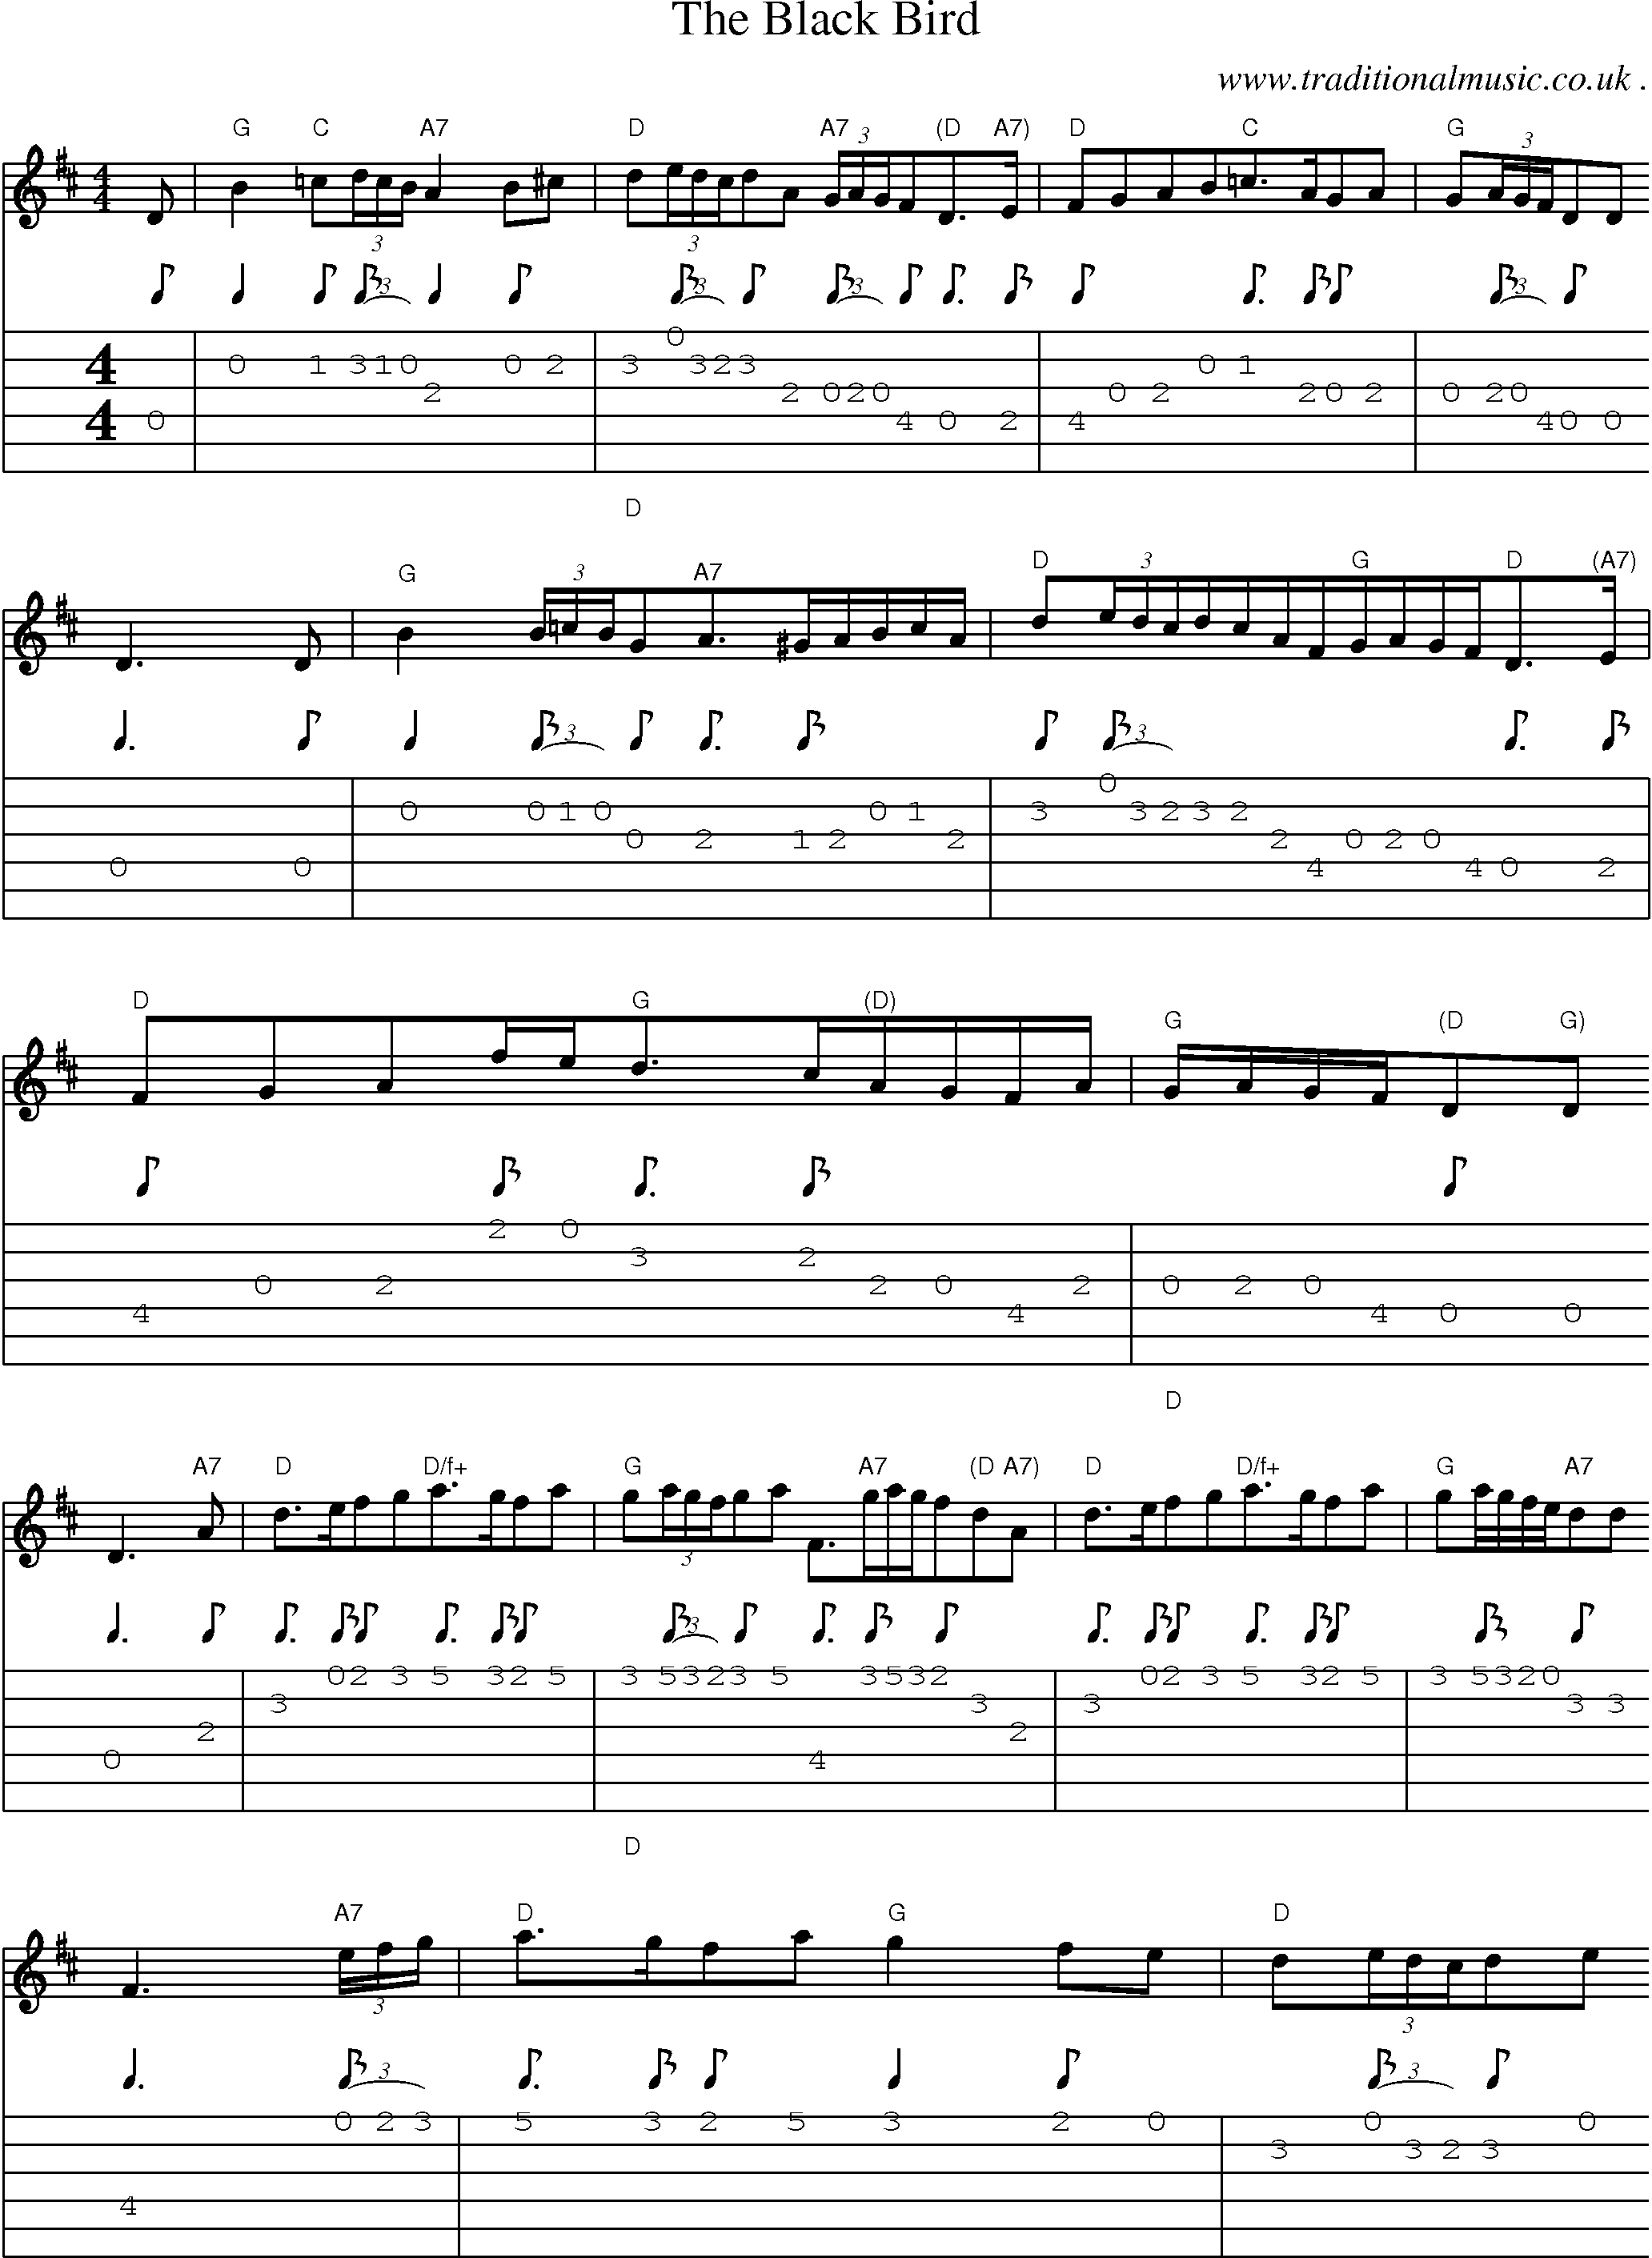 Sheet-Music and Guitar Tabs for The Black Bird